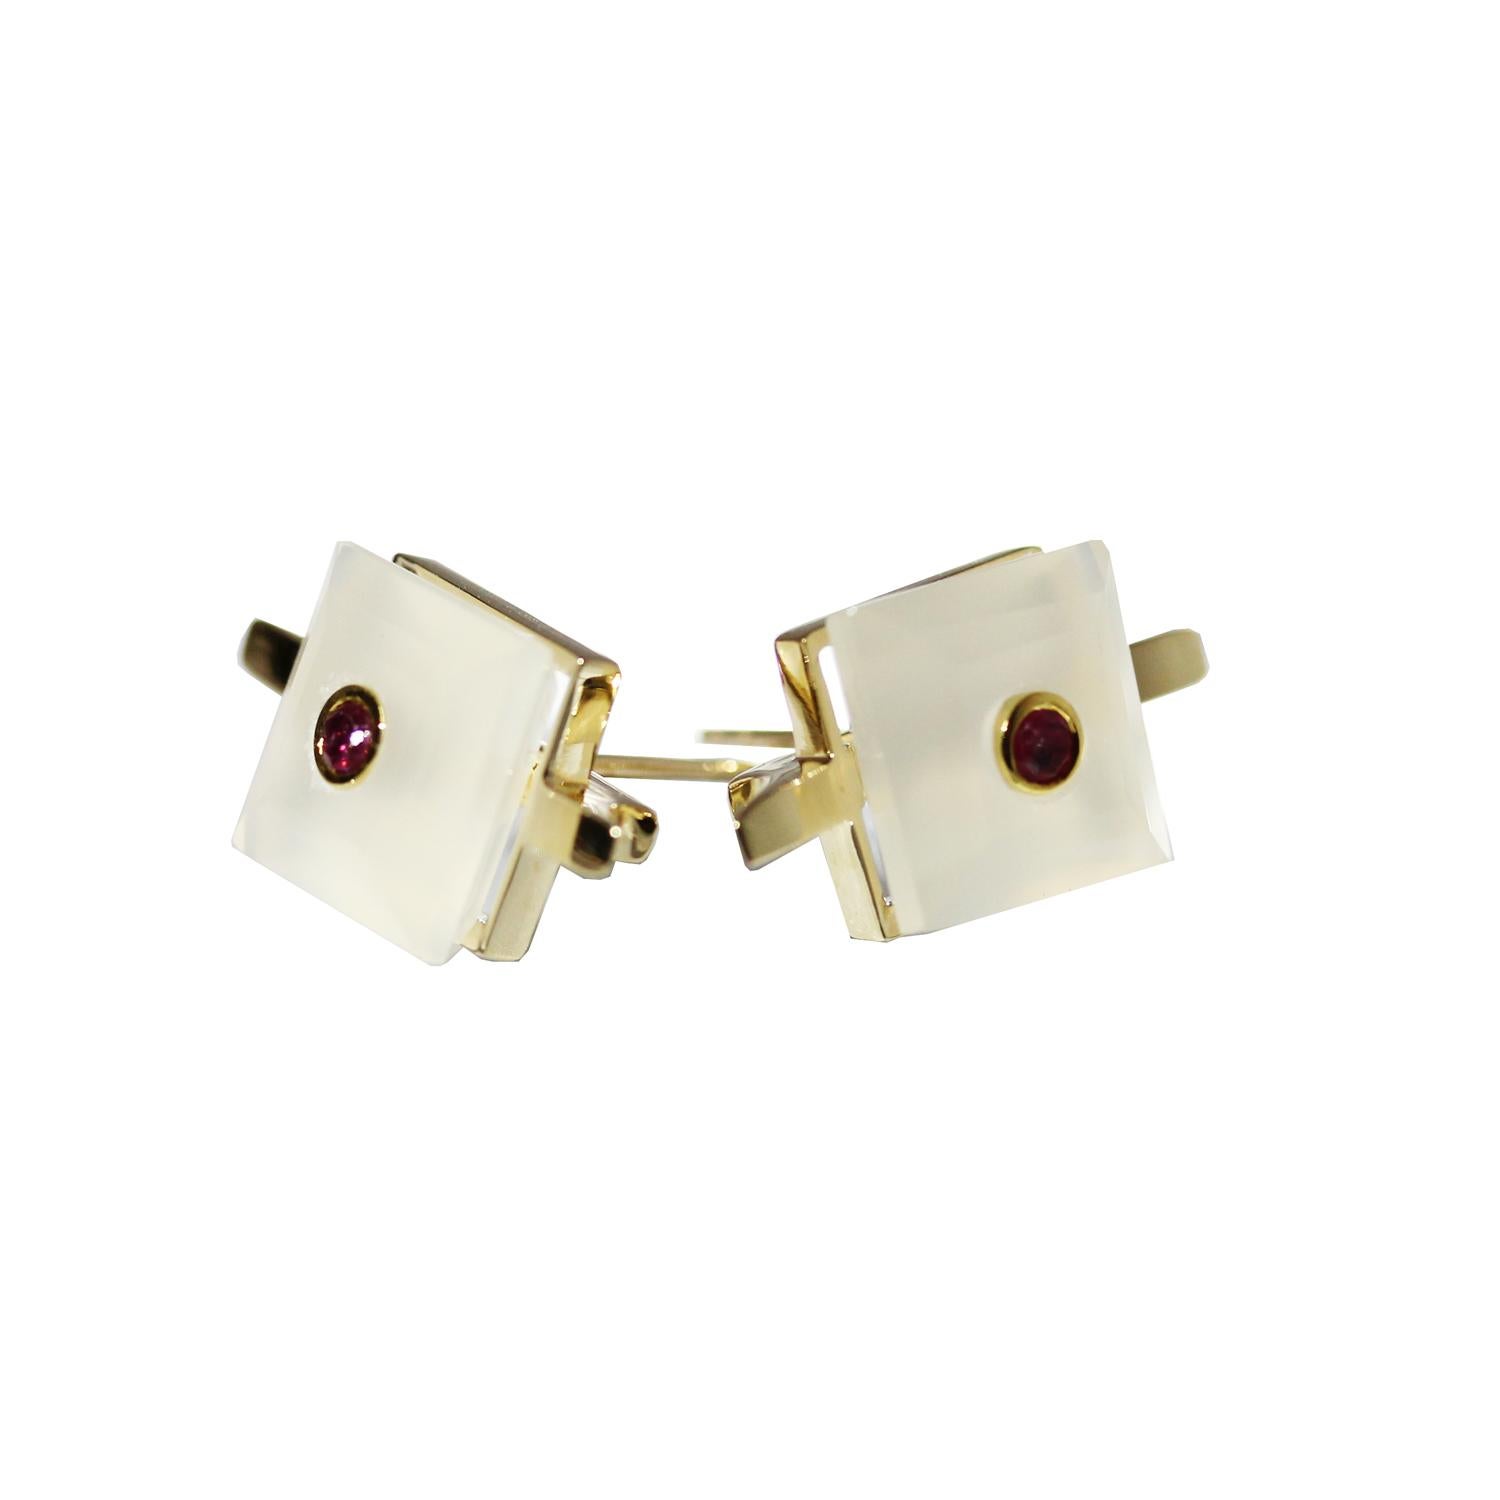 This modern handmade British 9 karat yellow gold earring studs, set with square cut white chalcedony and natural ruby in the center is from MAIKO NAGAYAMA's one of the Pret-a-porter Collection called 